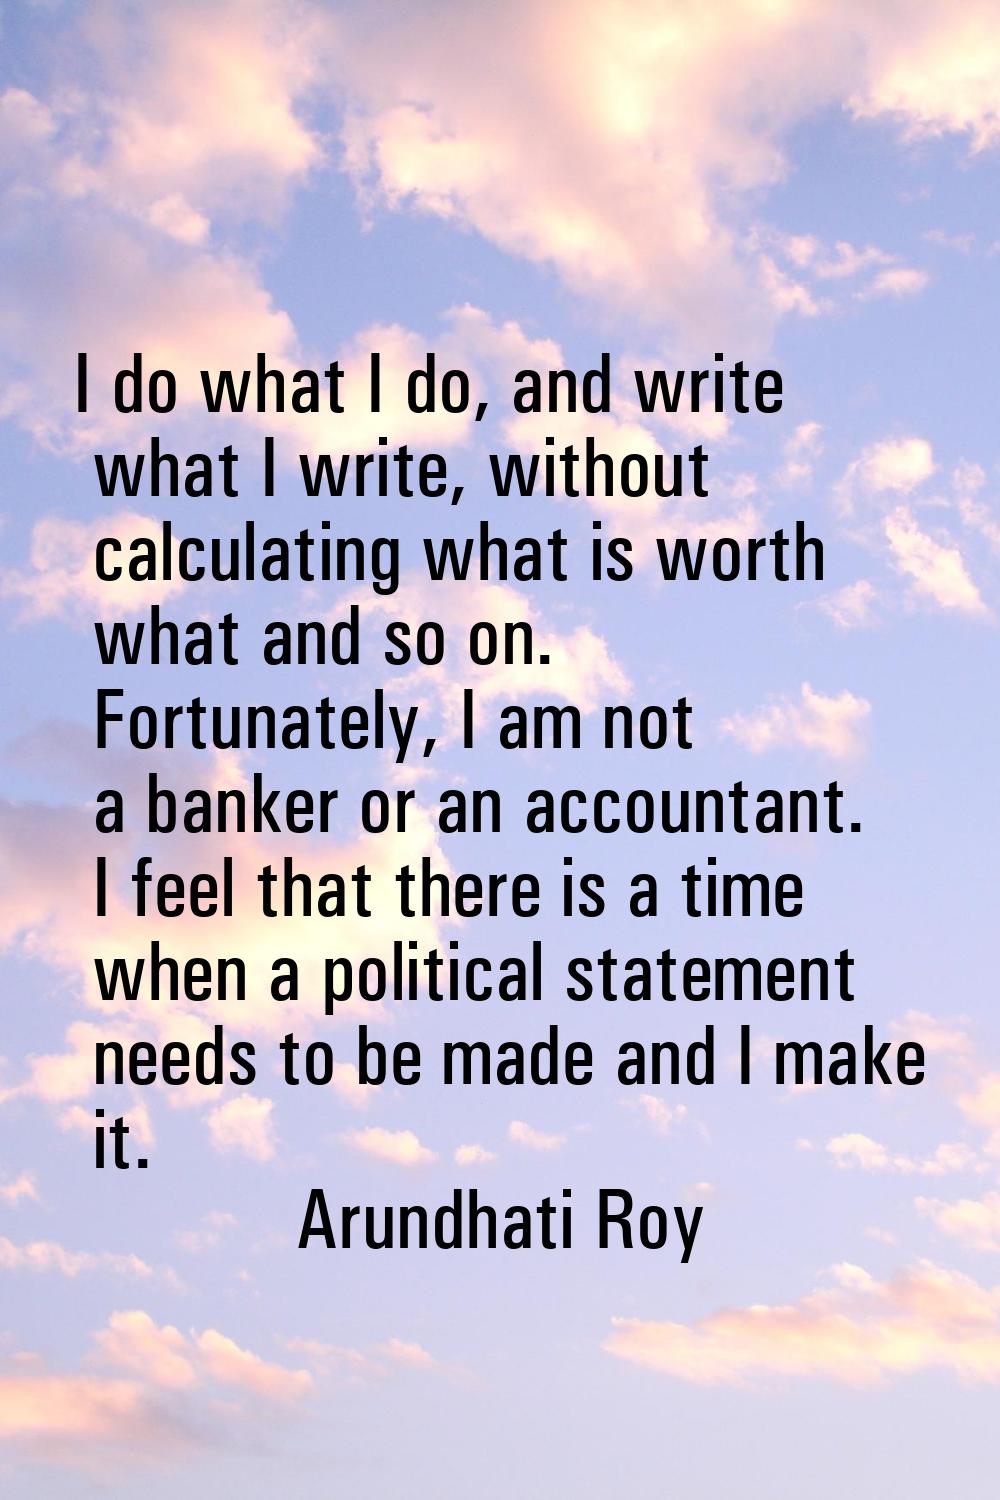 I do what I do, and write what I write, without calculating what is worth what and so on. Fortunate